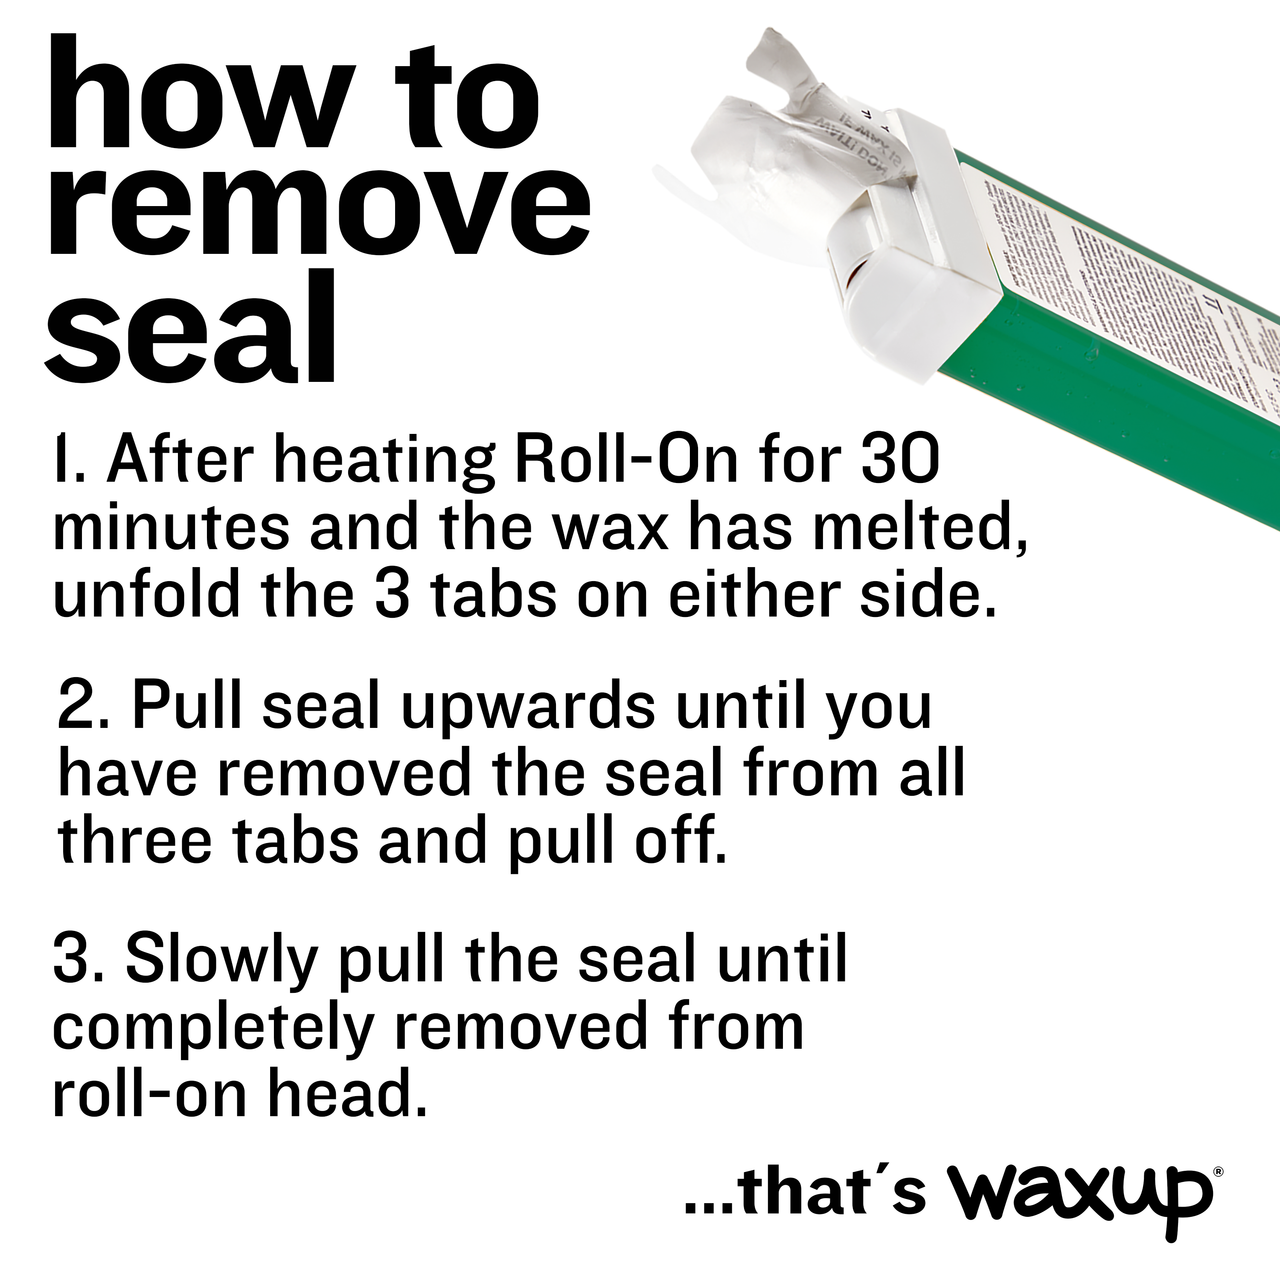 Aloe Vera Roll On Wax Cartridges 4 Pack Buy with Prime - thatswaxup -  - Roll On Wax - waxup hair removal wax body waxing kit women and men professional waxing supplies